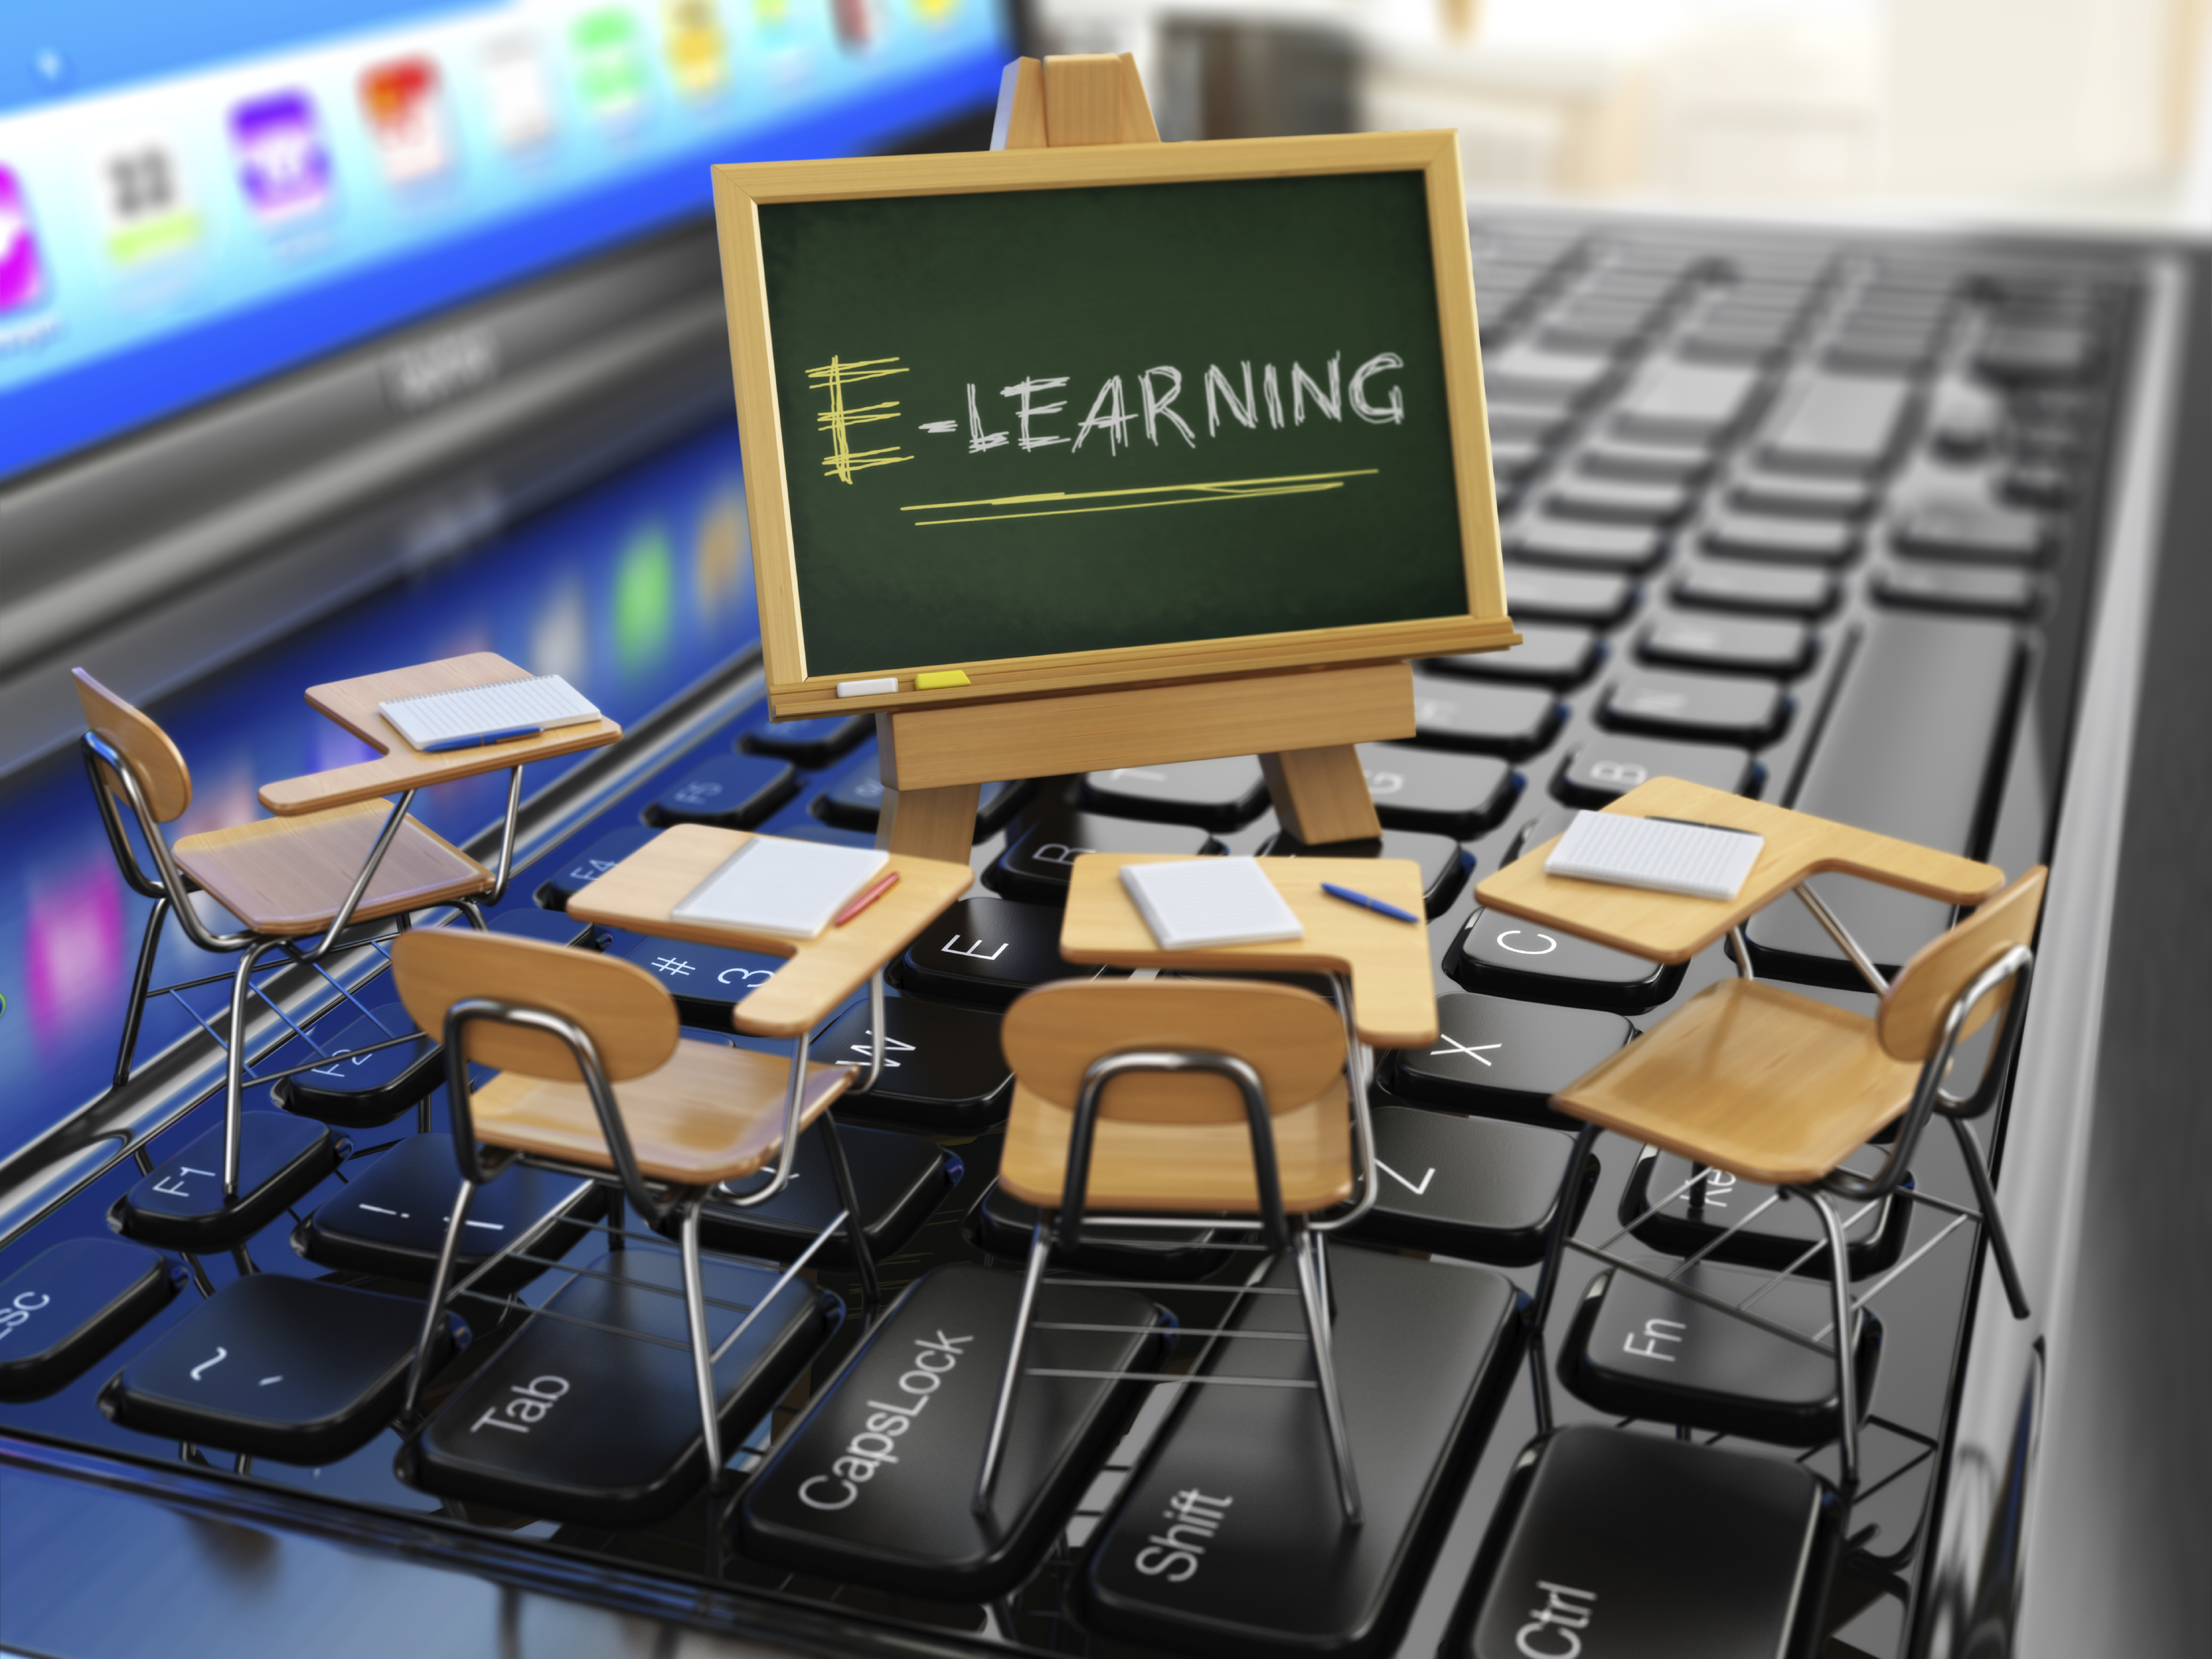 Financial Services training concept image. The words E-learning are shown on a miniature chalkboard standing on a keyboard.